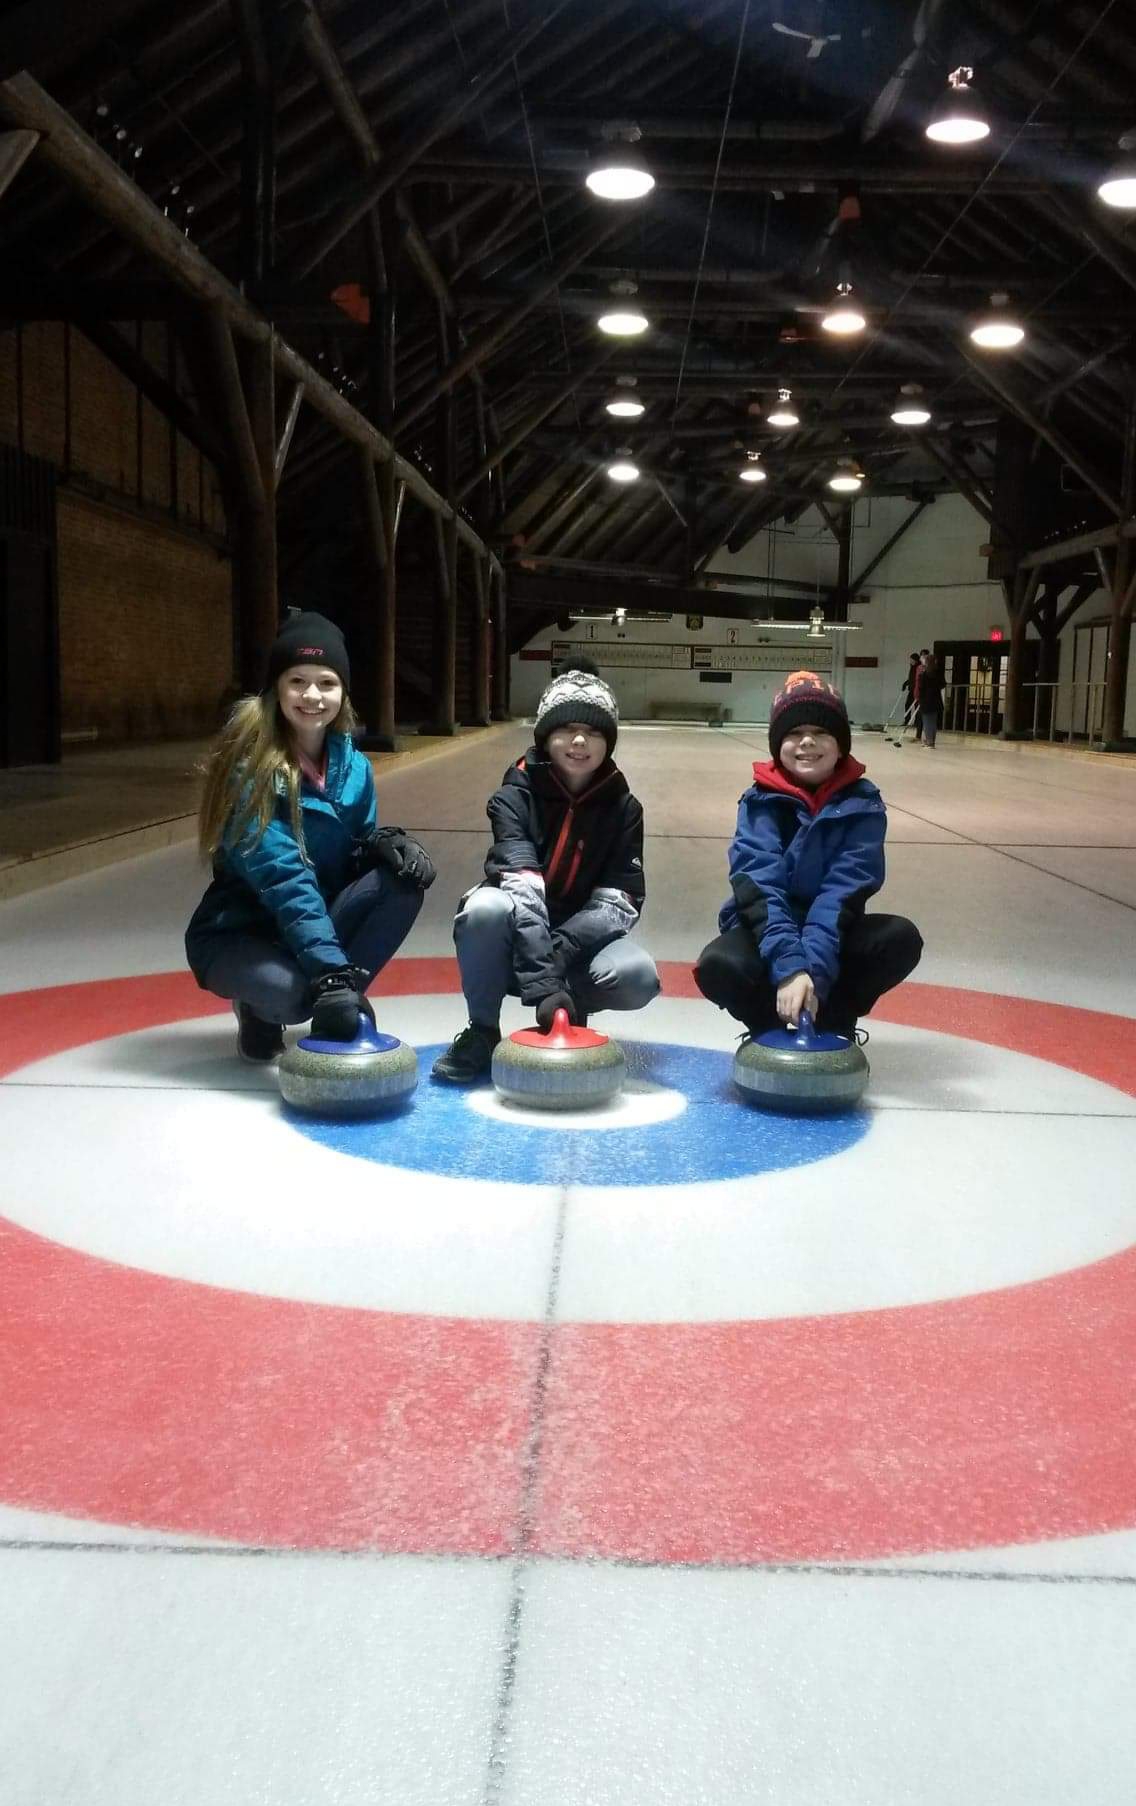 Curling party real game with three curlers